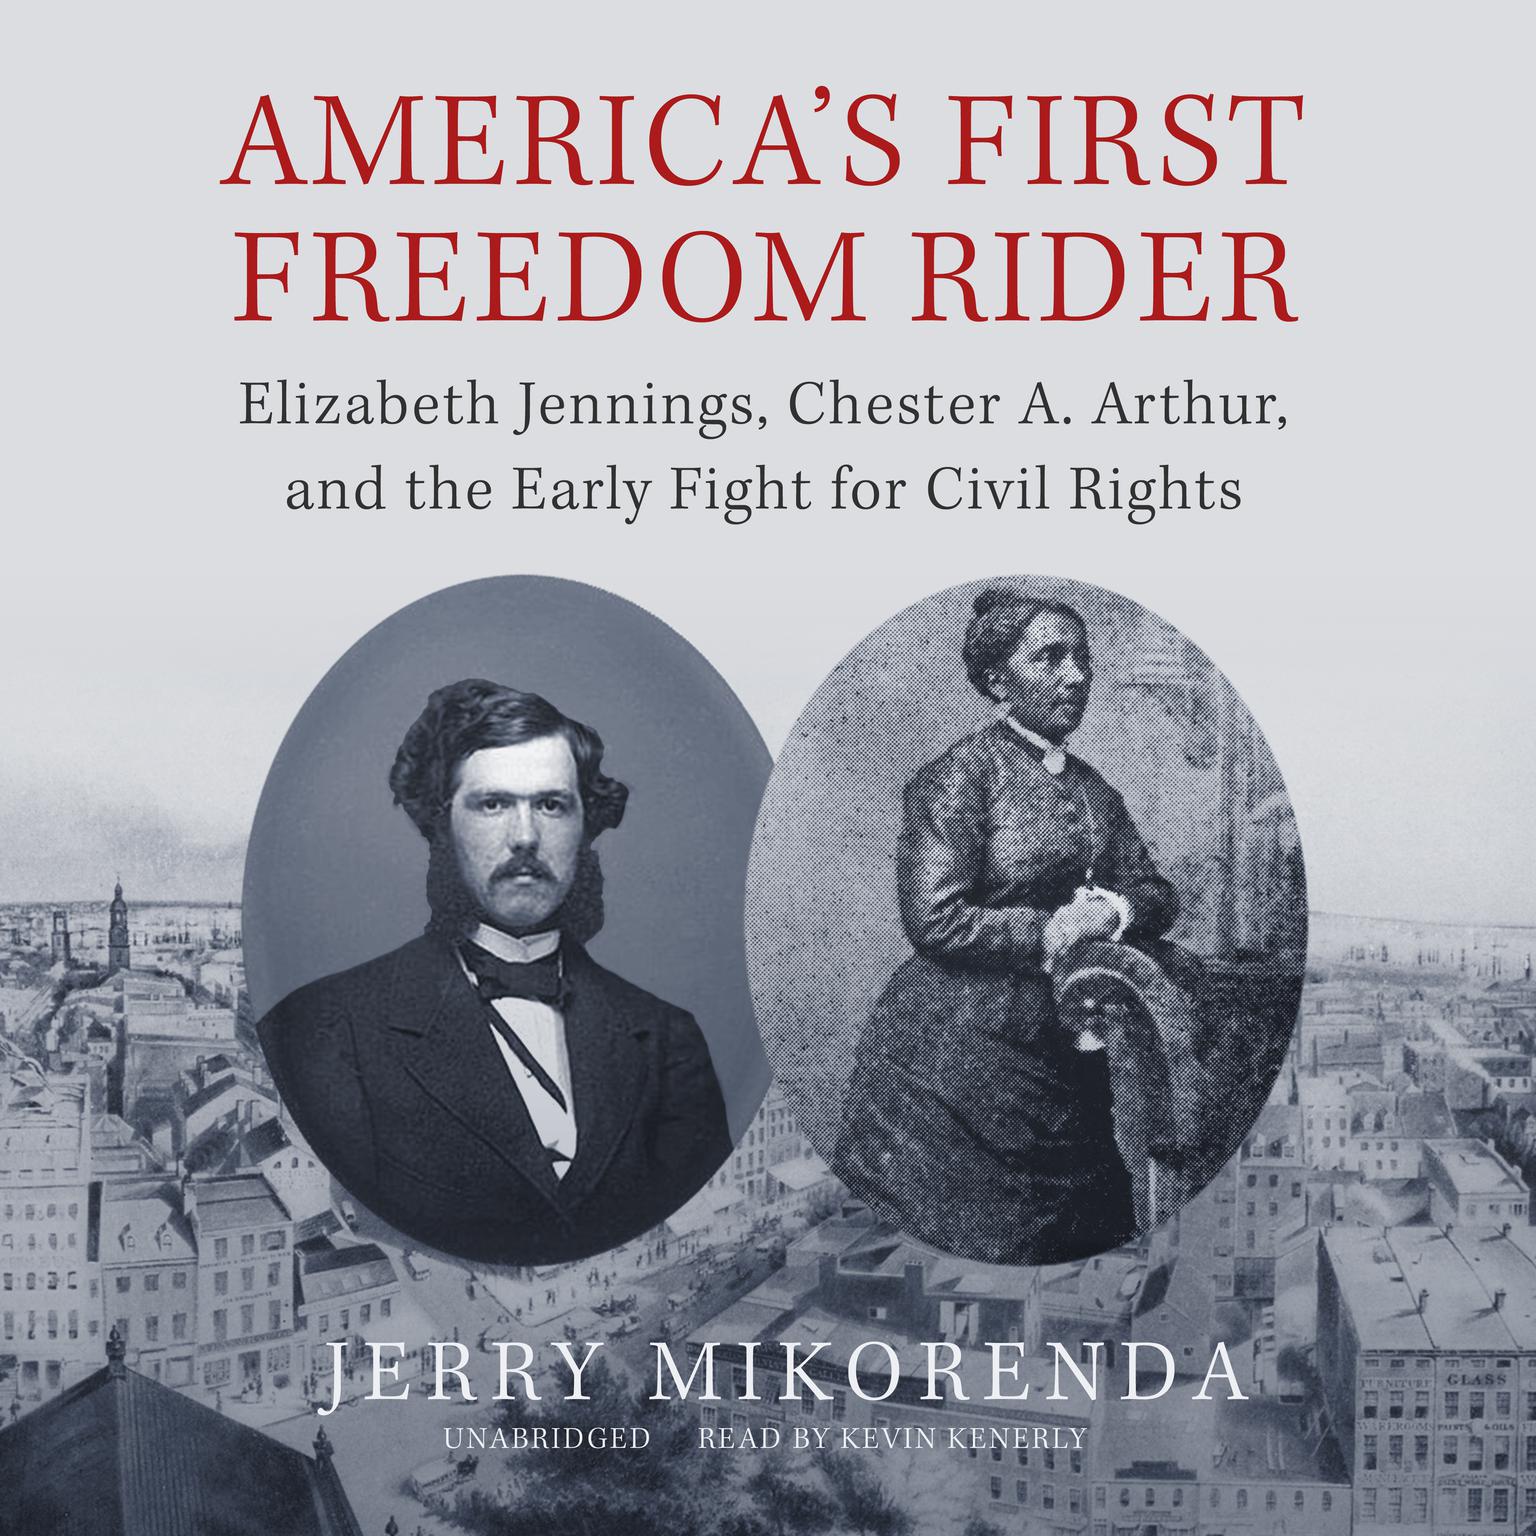 America’s First Freedom Rider: Elizabeth Jennings, Chester A. Arthur, and the Early Fight for Civil Rights Audiobook, by Jerry Mikorenda